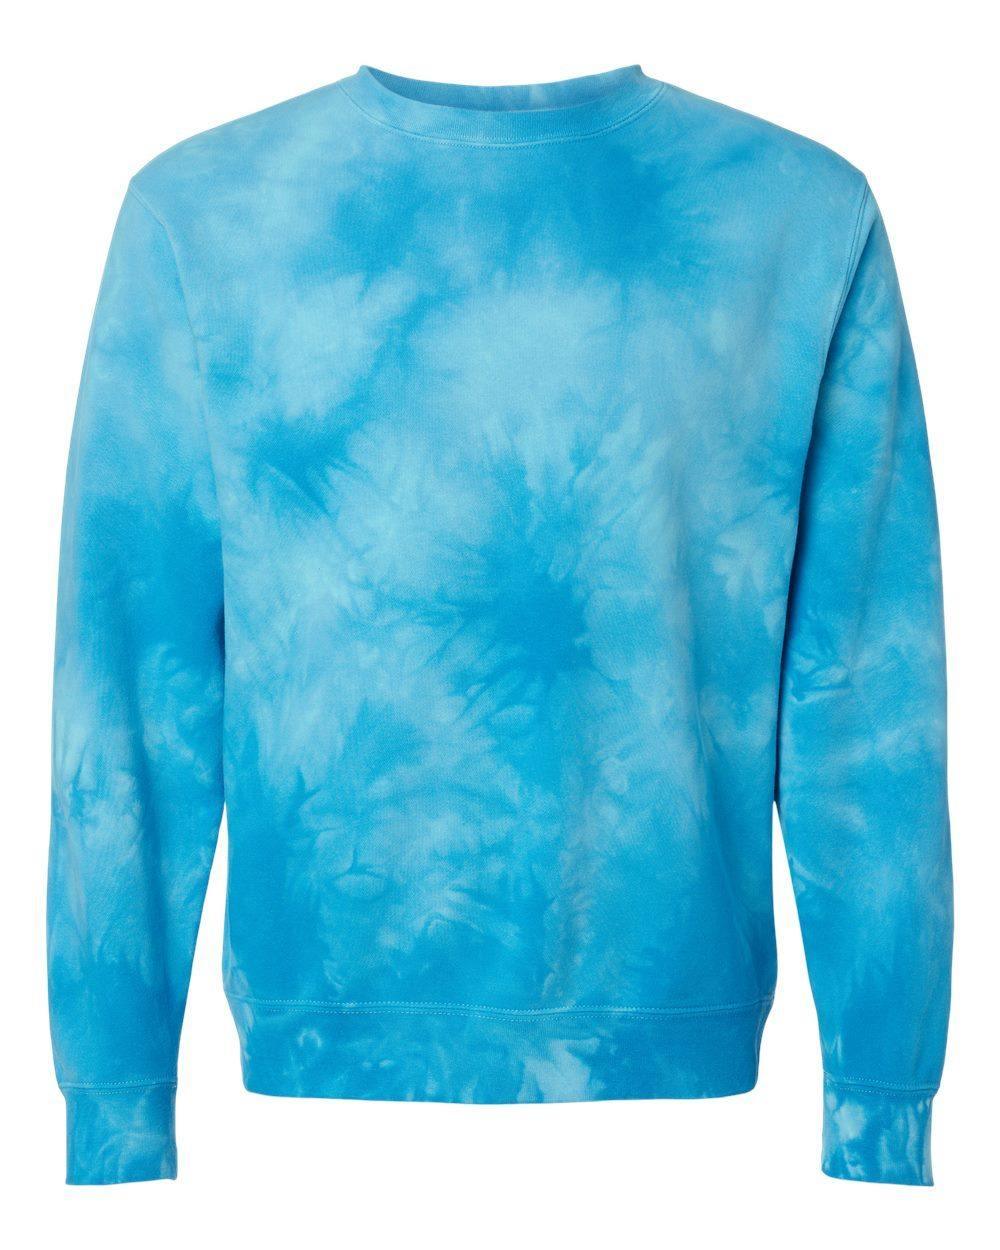 Blank Tie Dye Pigment Dyed Sweaters - Constantly Create Shop